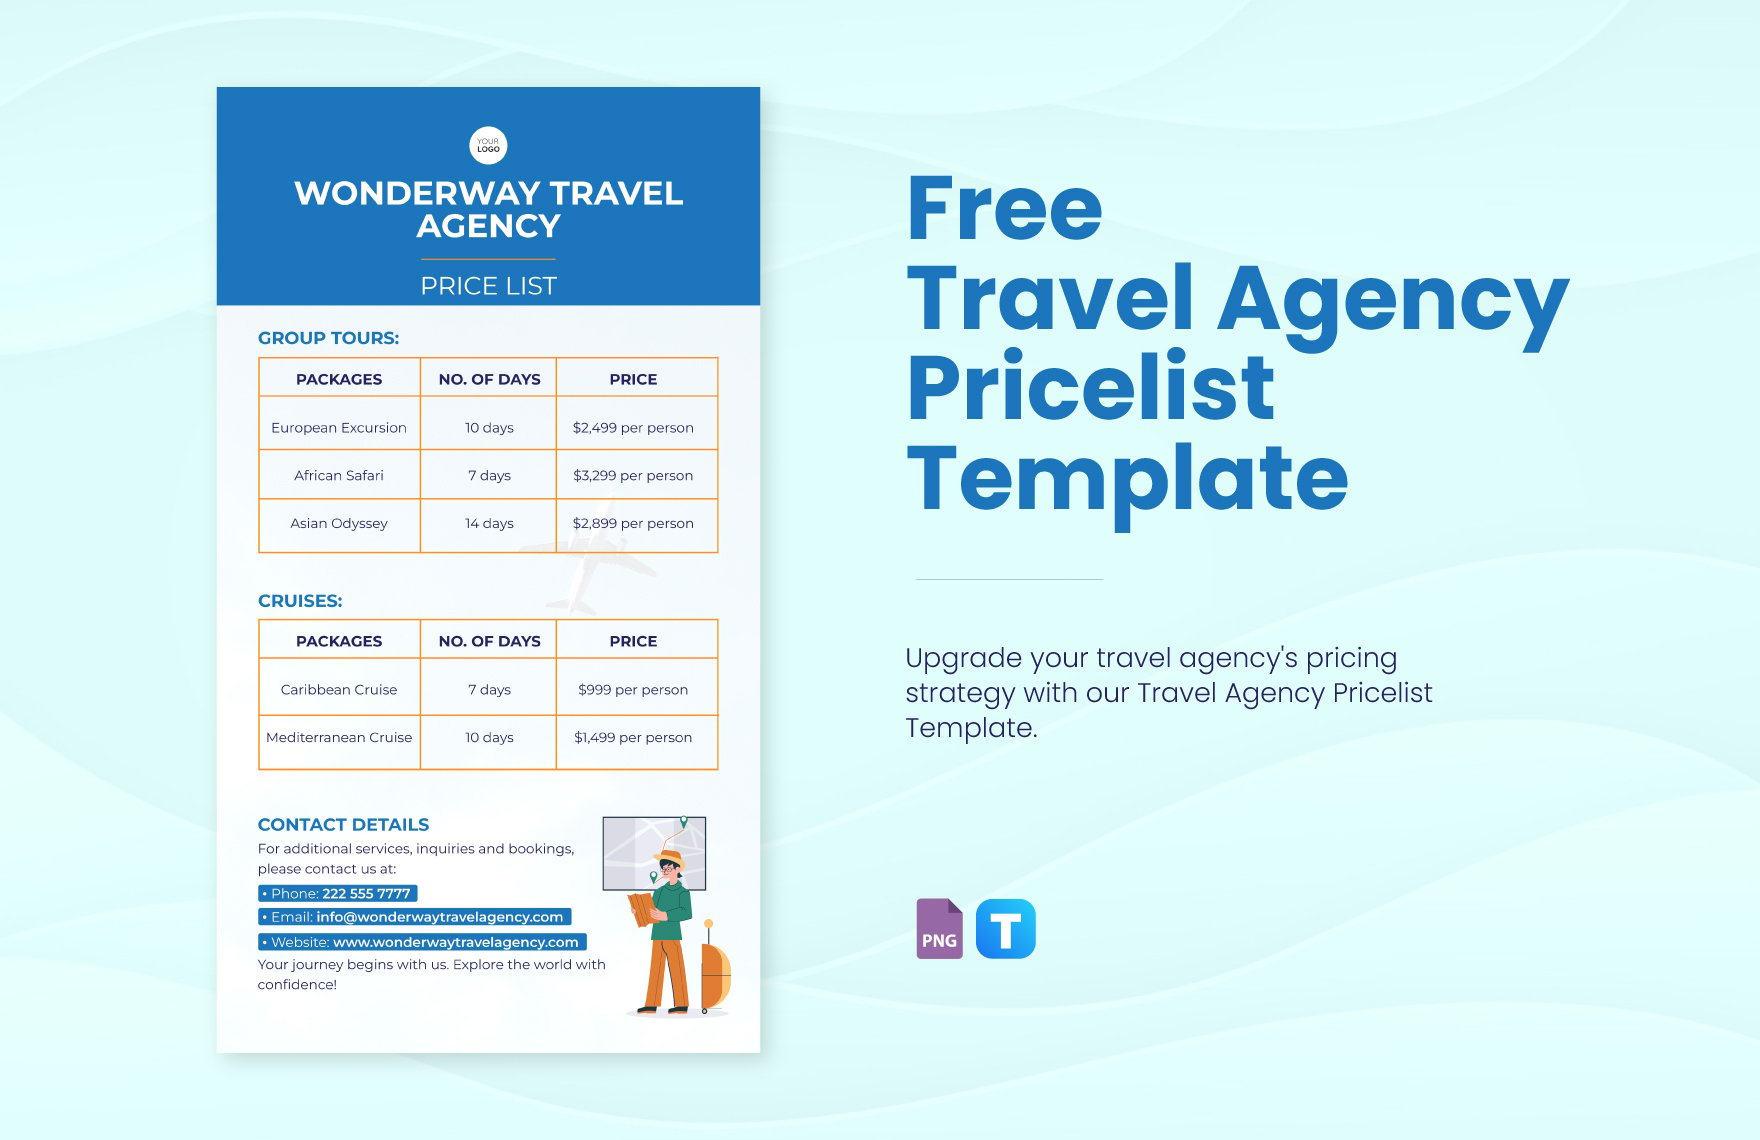 Free Travel Agency Pricelist Template in PNG